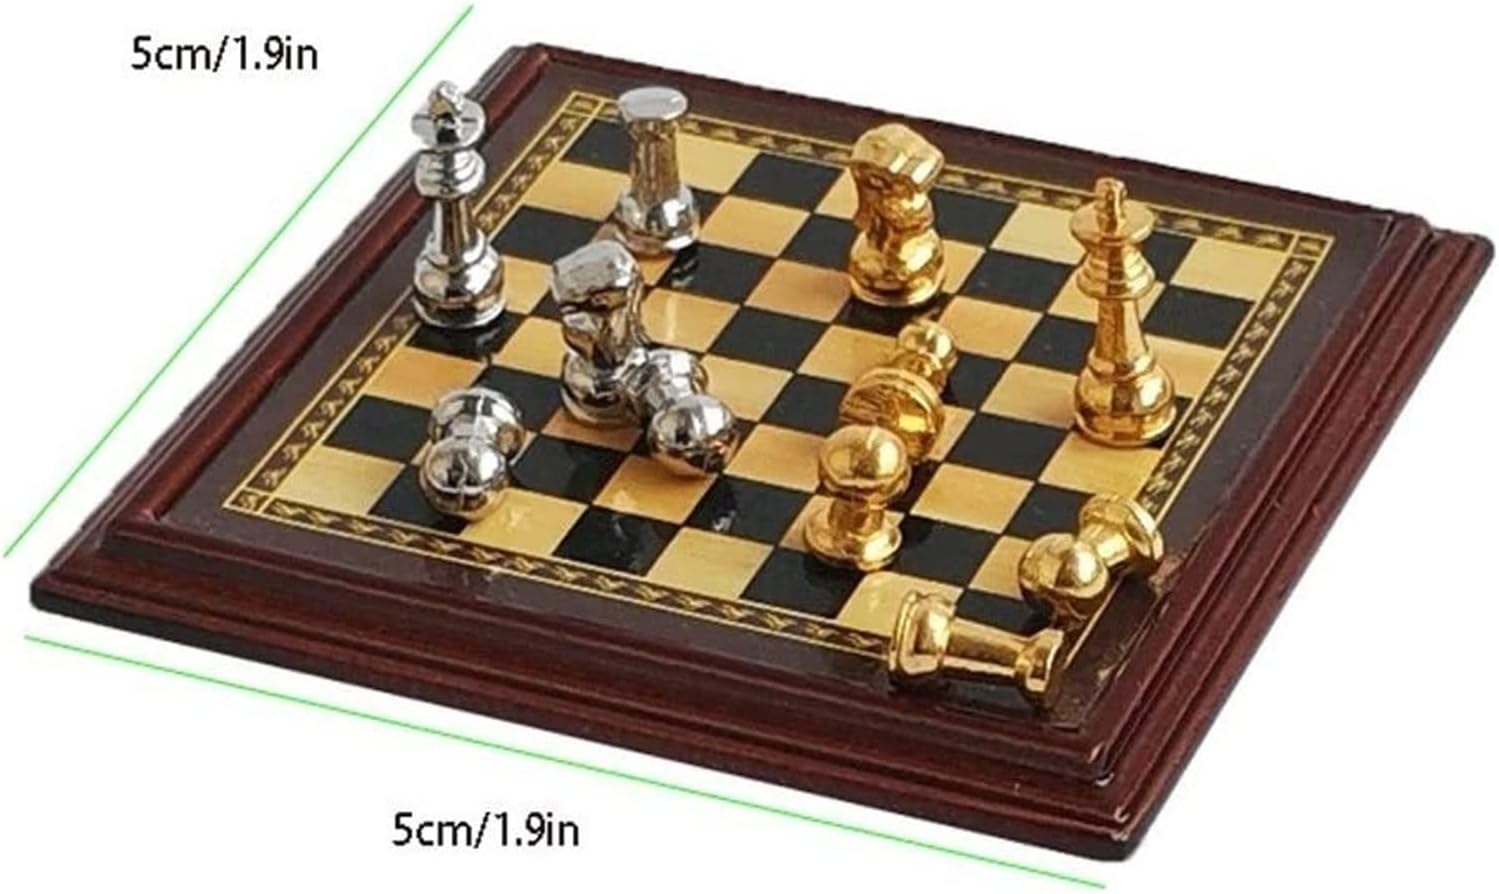 Chess Set Chess Board Small Chess 1.9 Inch Mini Chess Ornaments Portable Table Game for Outdoors, Travel Family Chess Boards for Adults